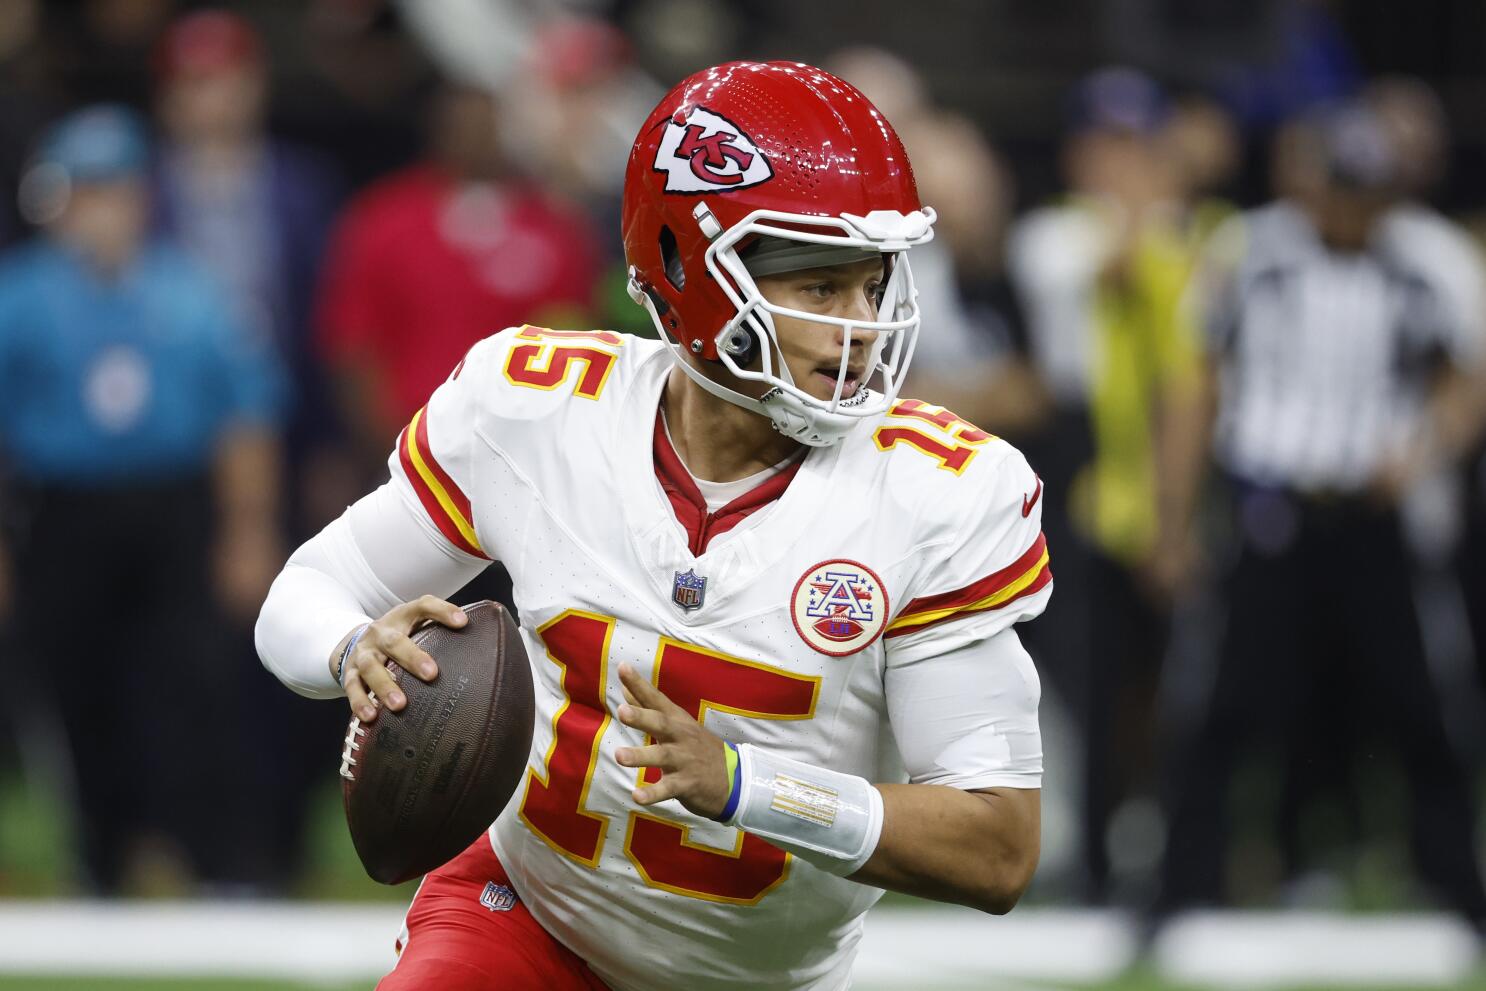 Chargers gamble, drive back Chiefs